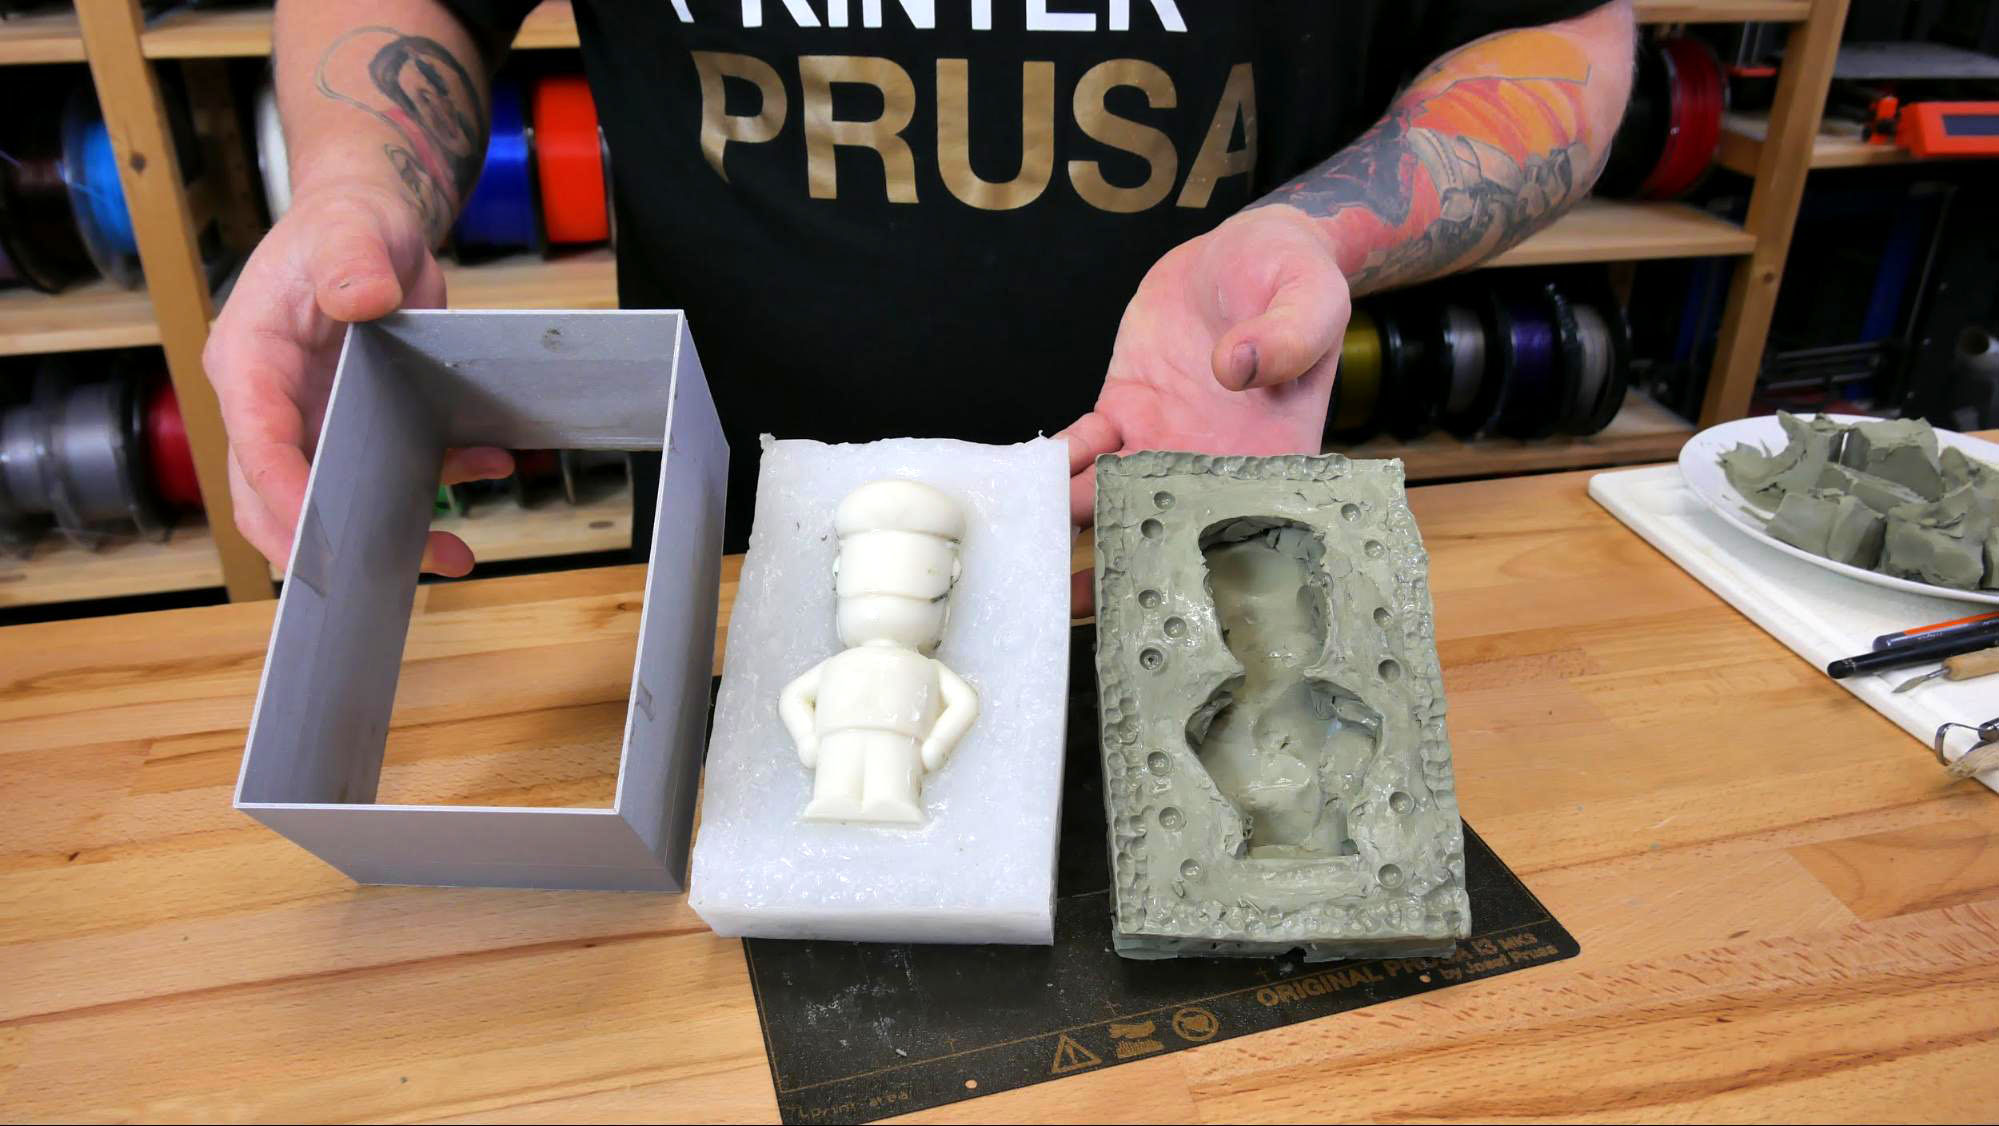 The beginner's guide to mold making and casting - Original Prusa 3D Printers